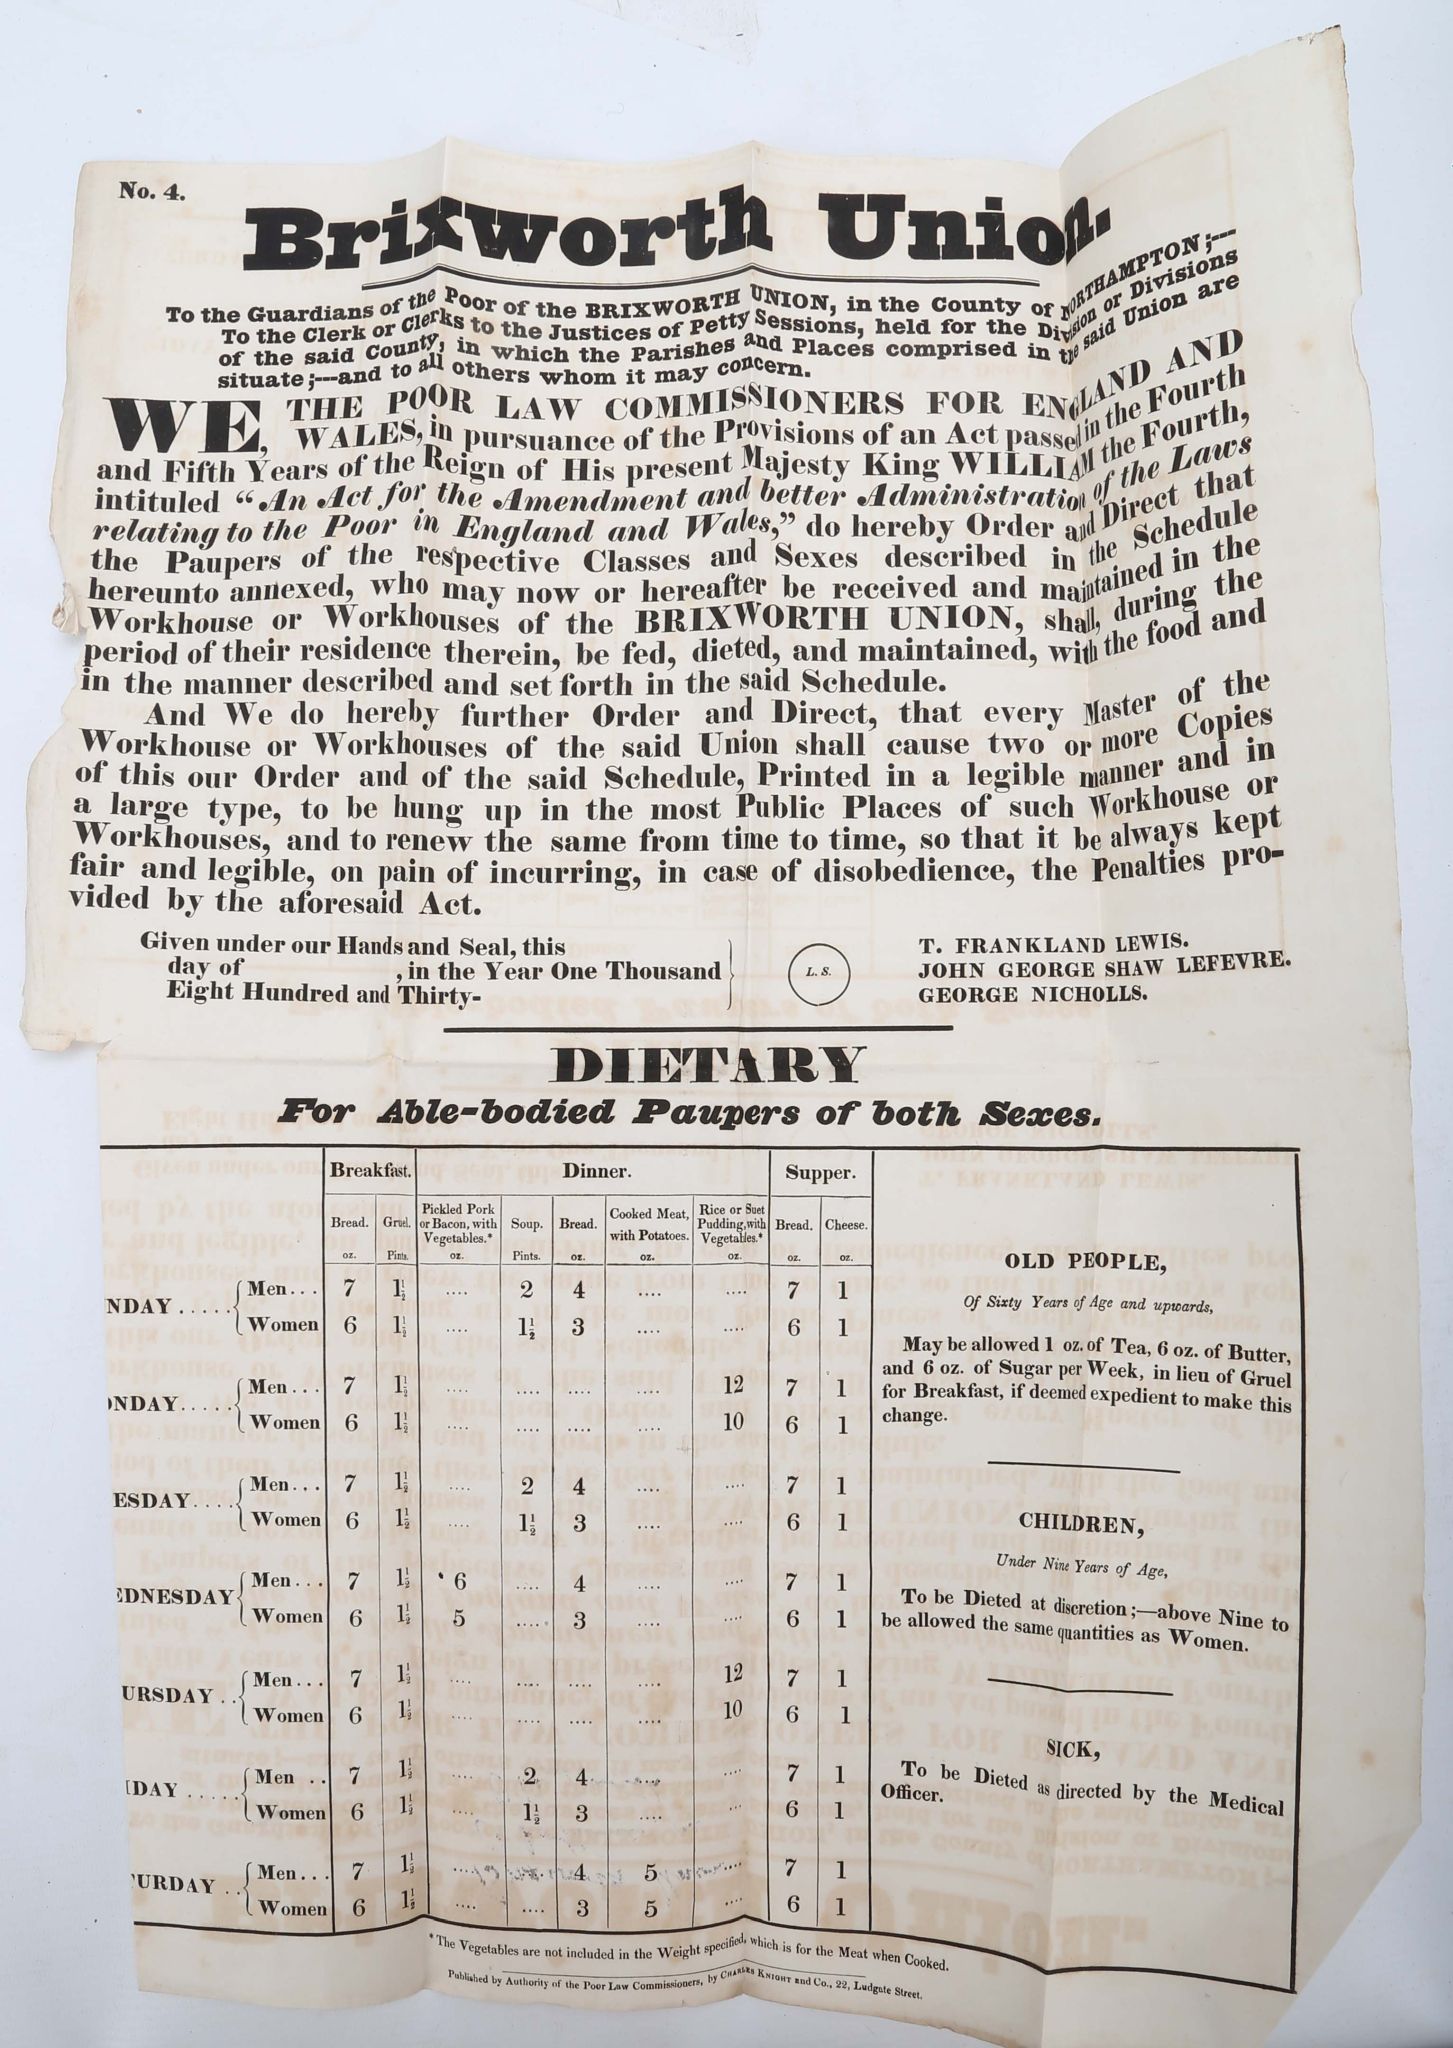 POOR LAWS - c.1836-7. A collection of ephemera relating to The Brixworth Union, including printed